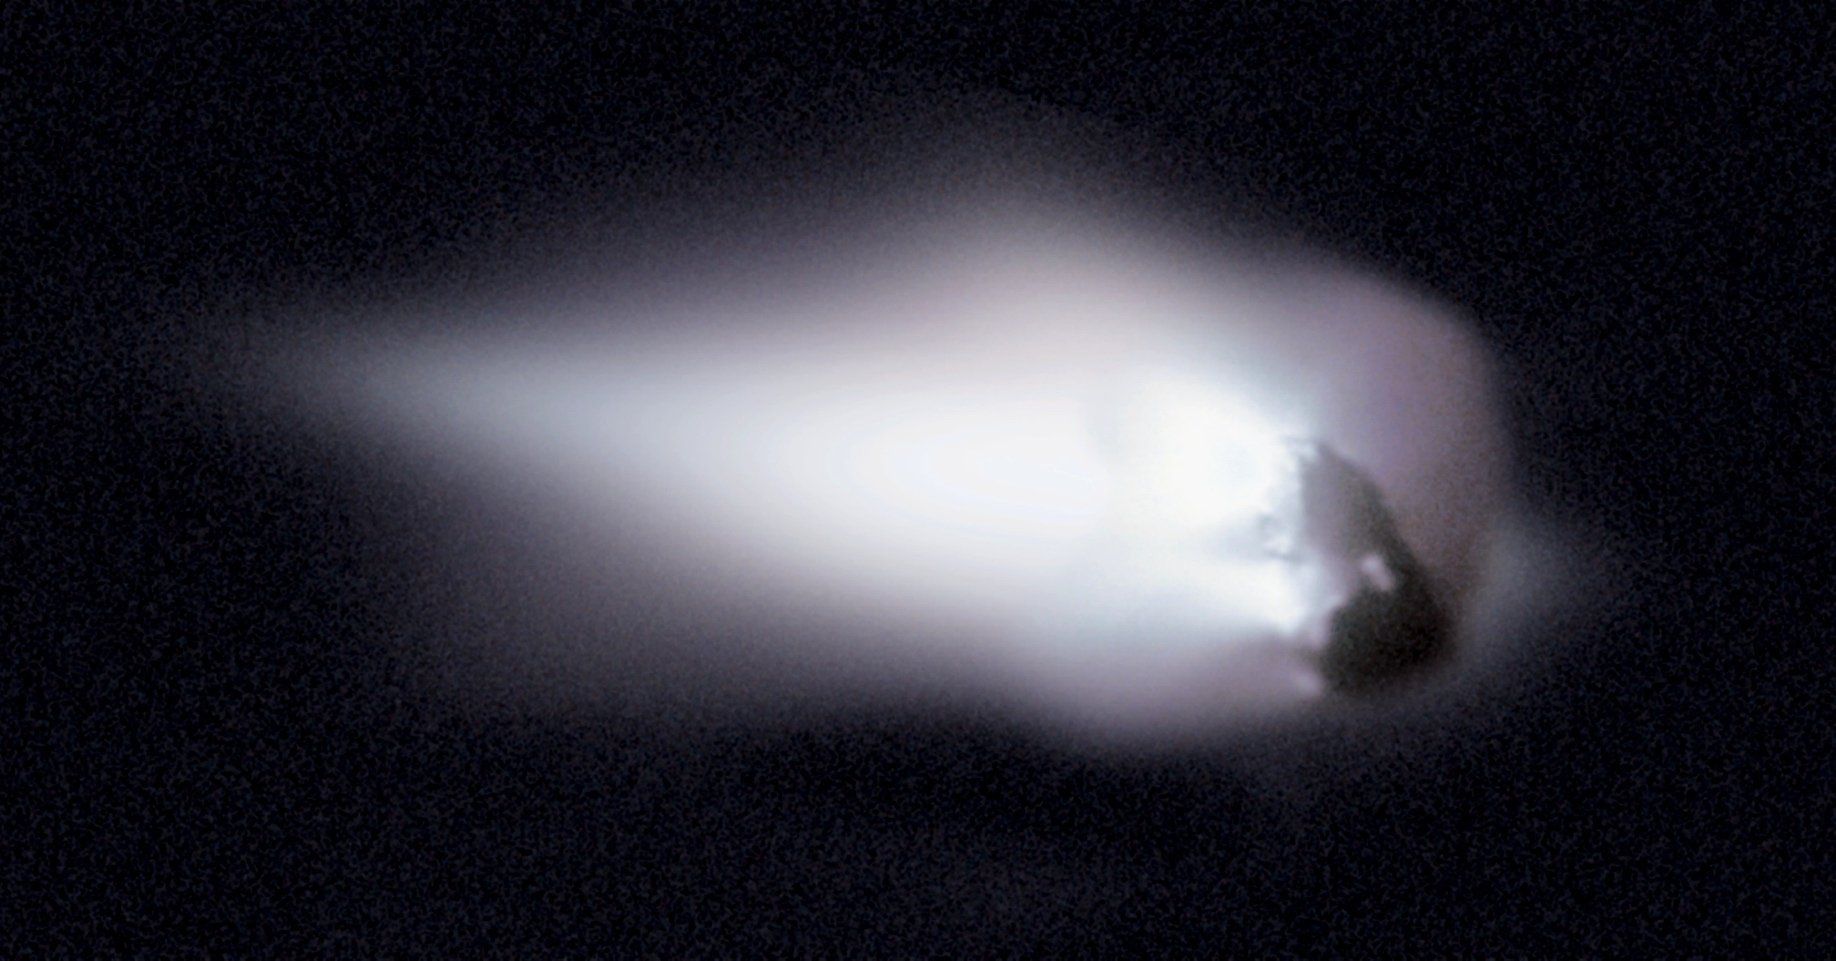 The nucleus of Halley’s Comet and the coma